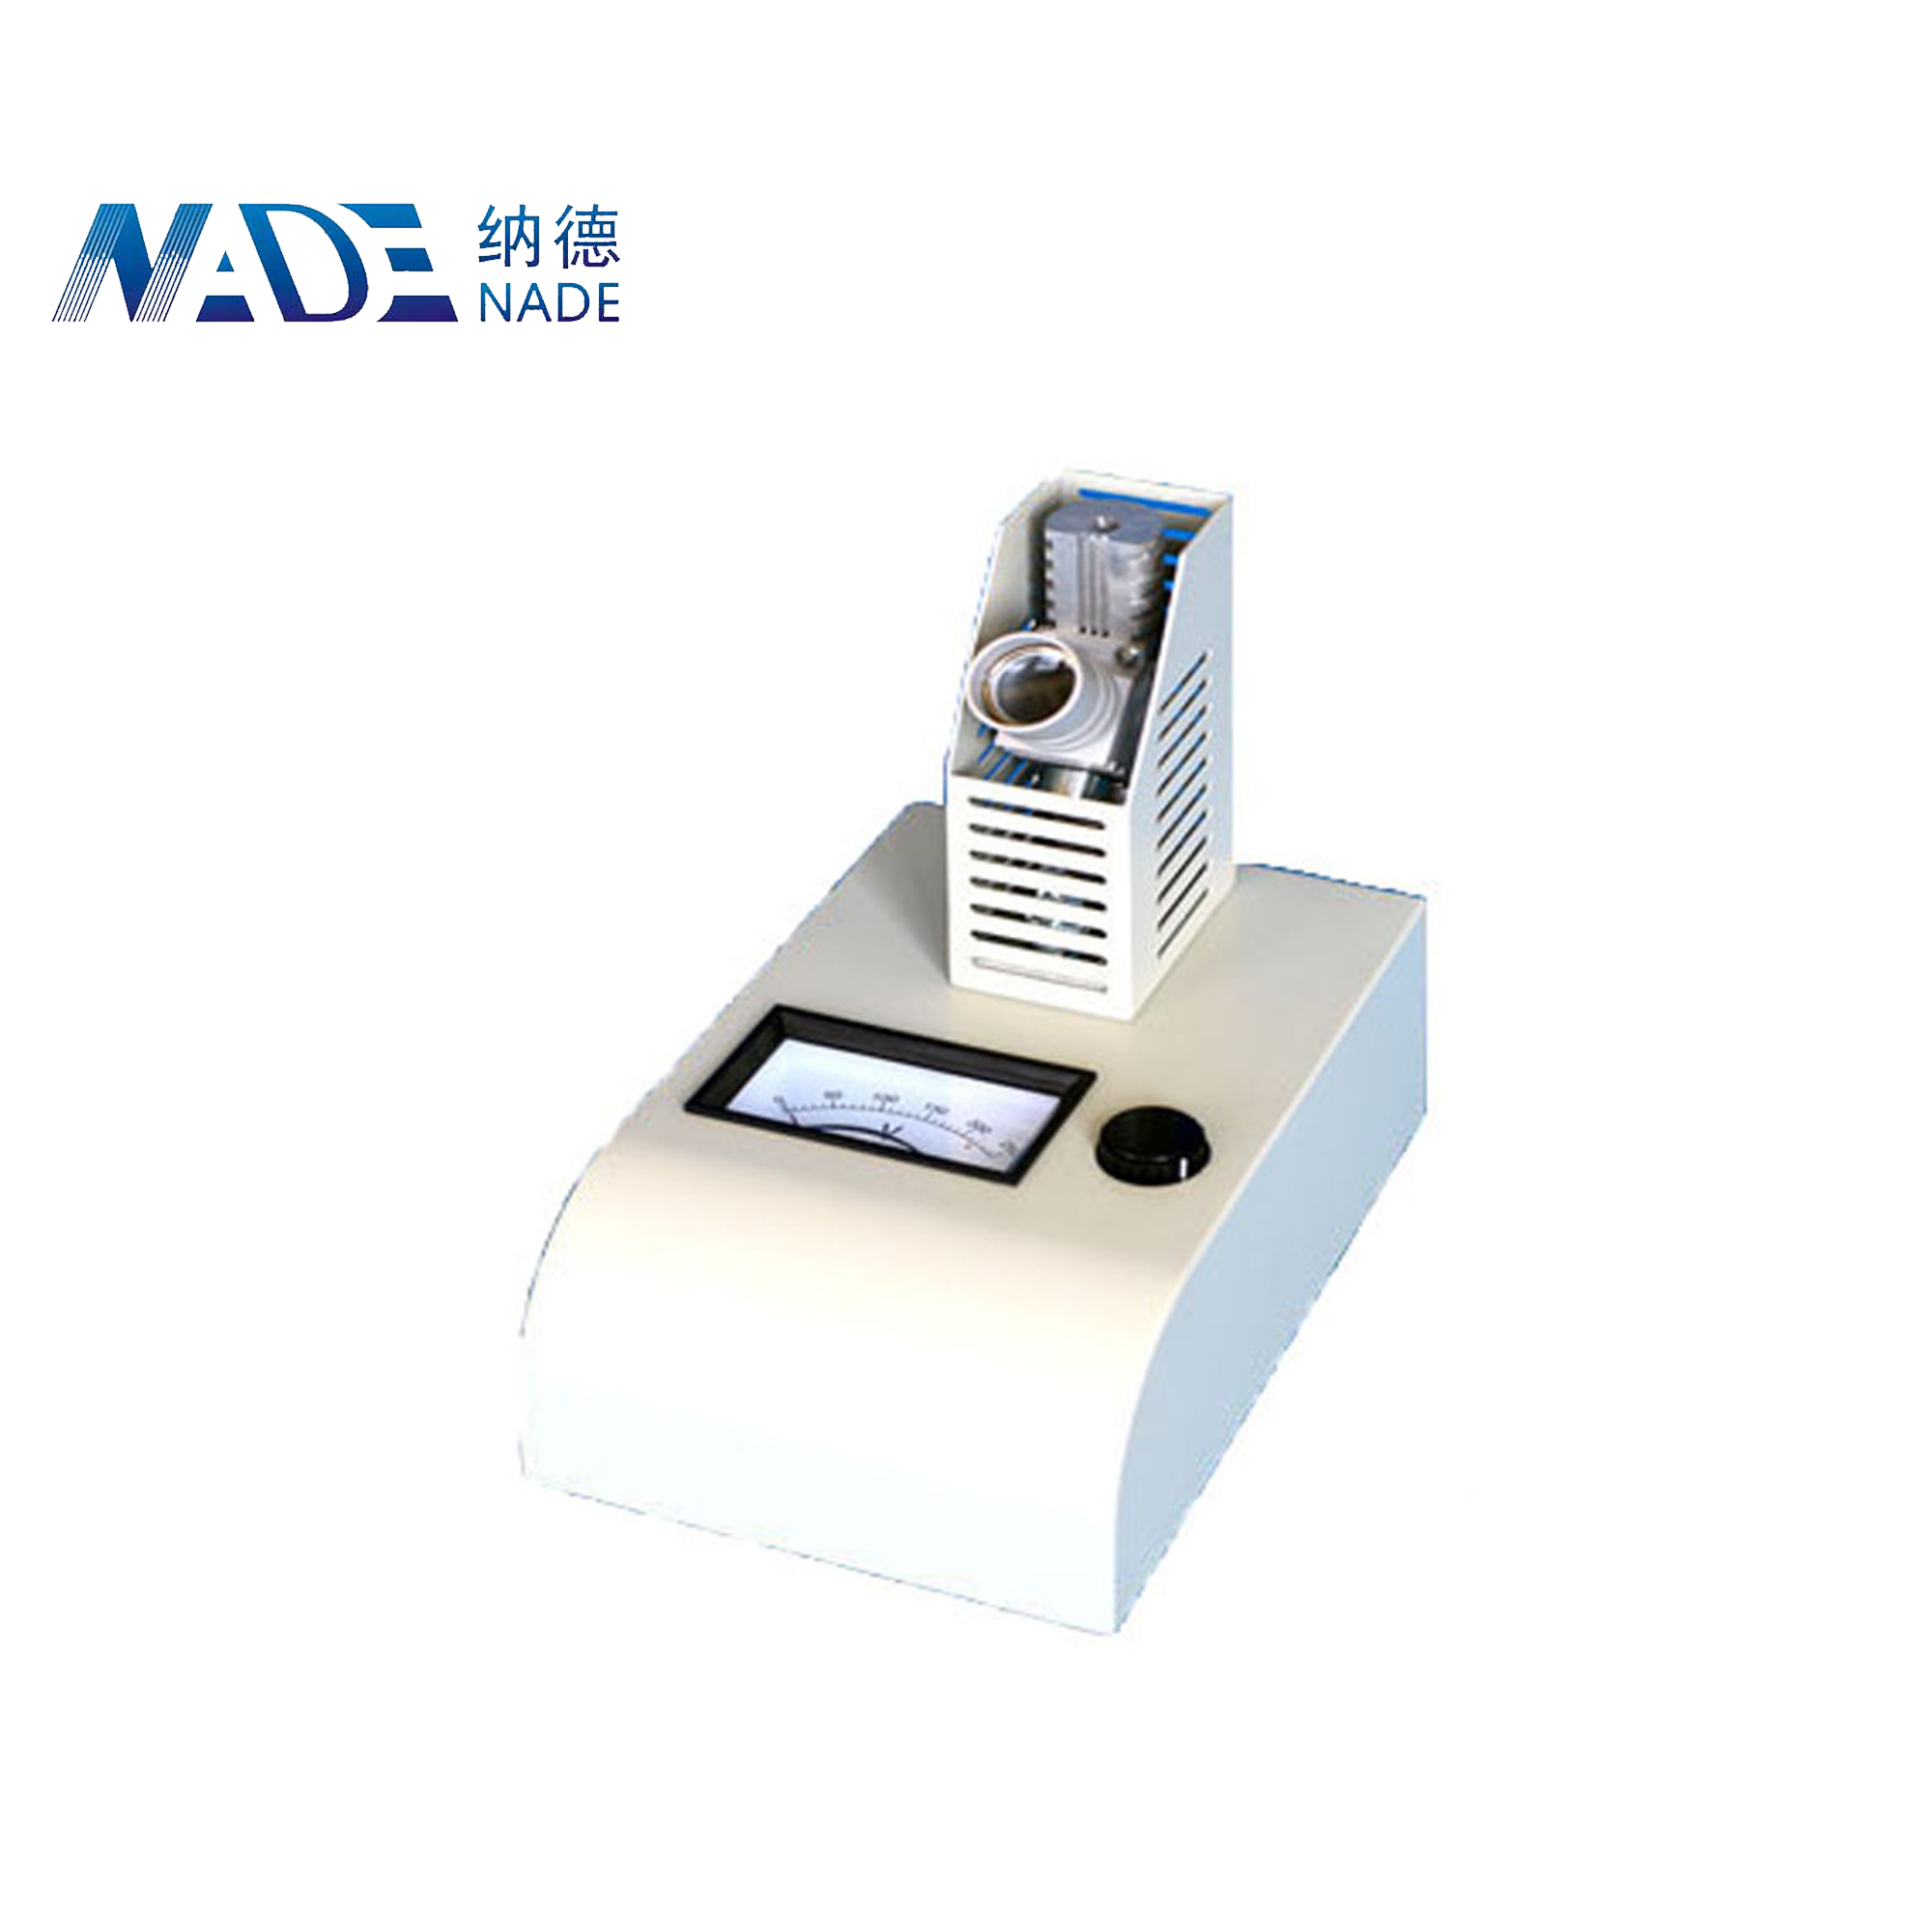 Nade MELTING POINT TESTER RY-1 automatic melting point apparatus